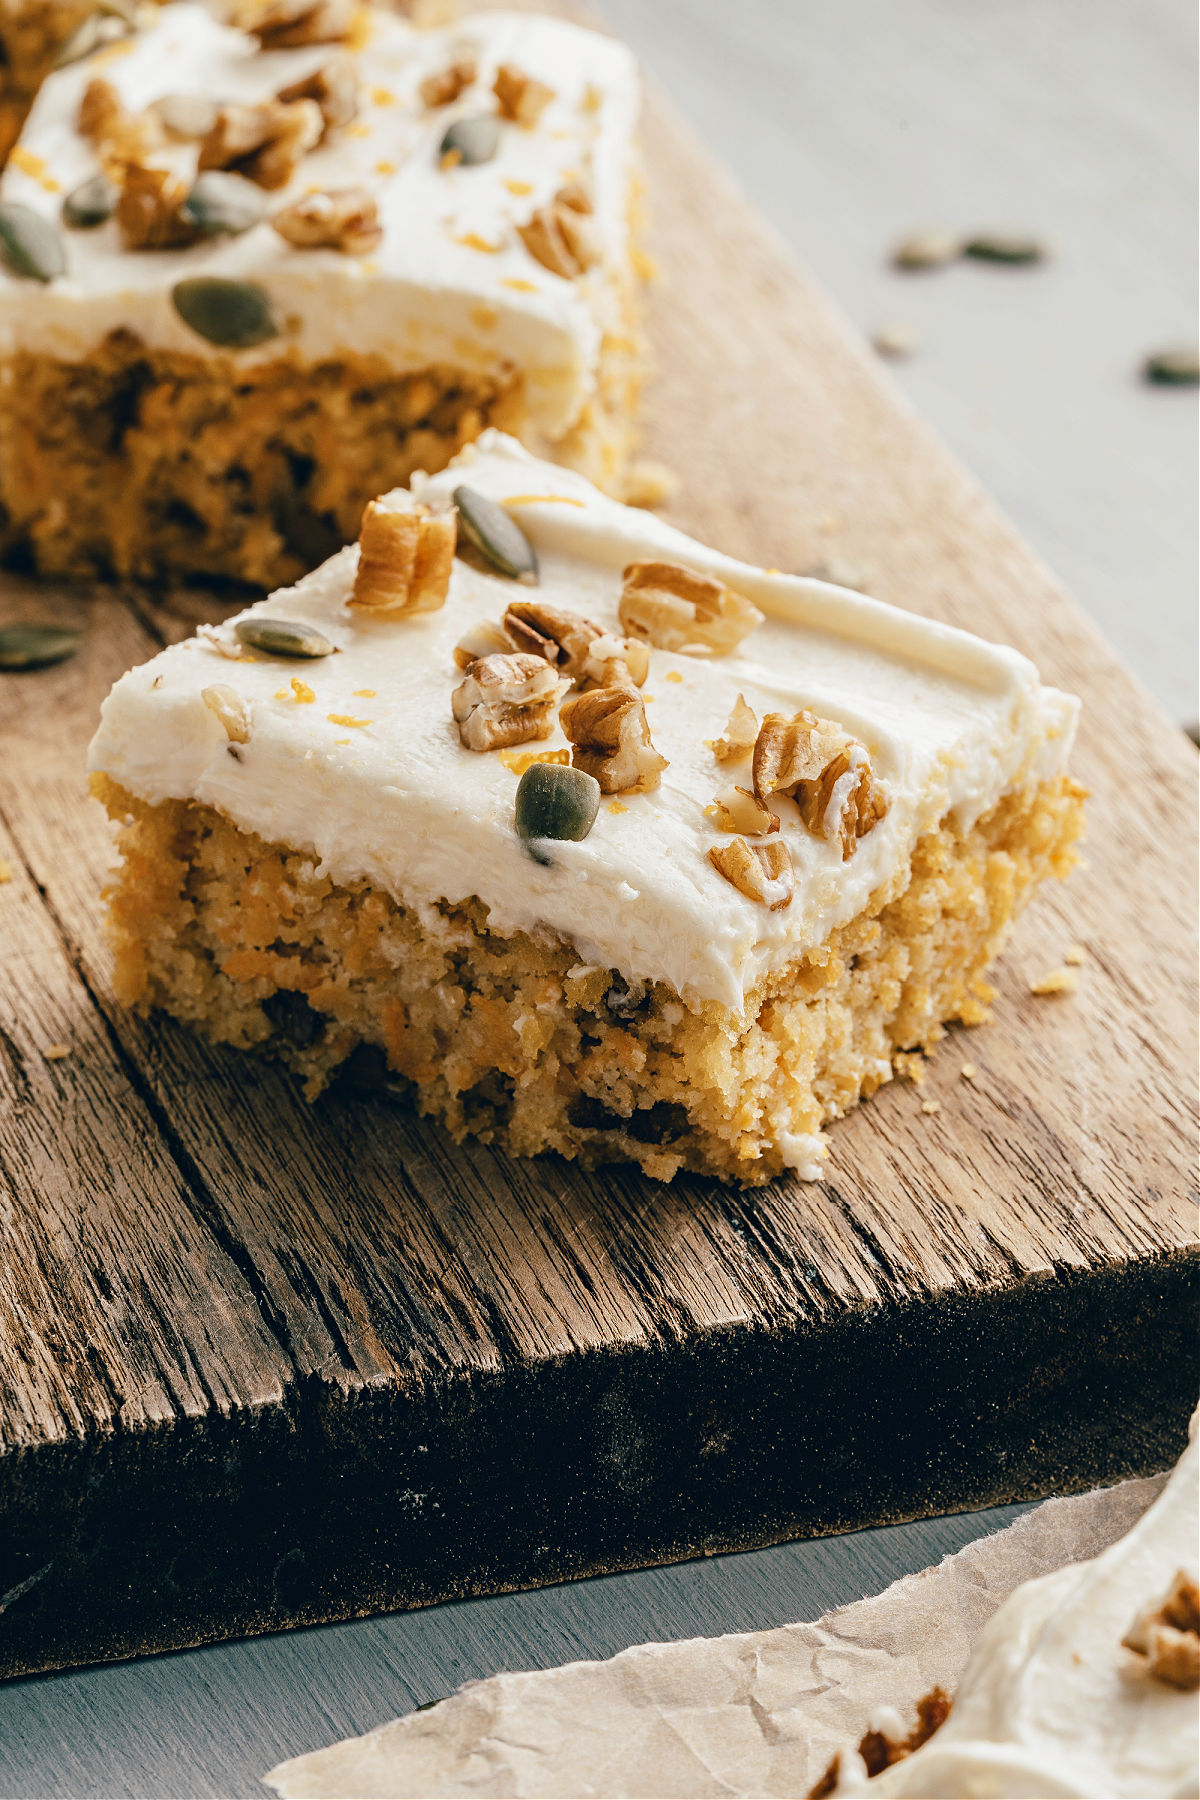 Two slices of carrot cake on wooden serving board.